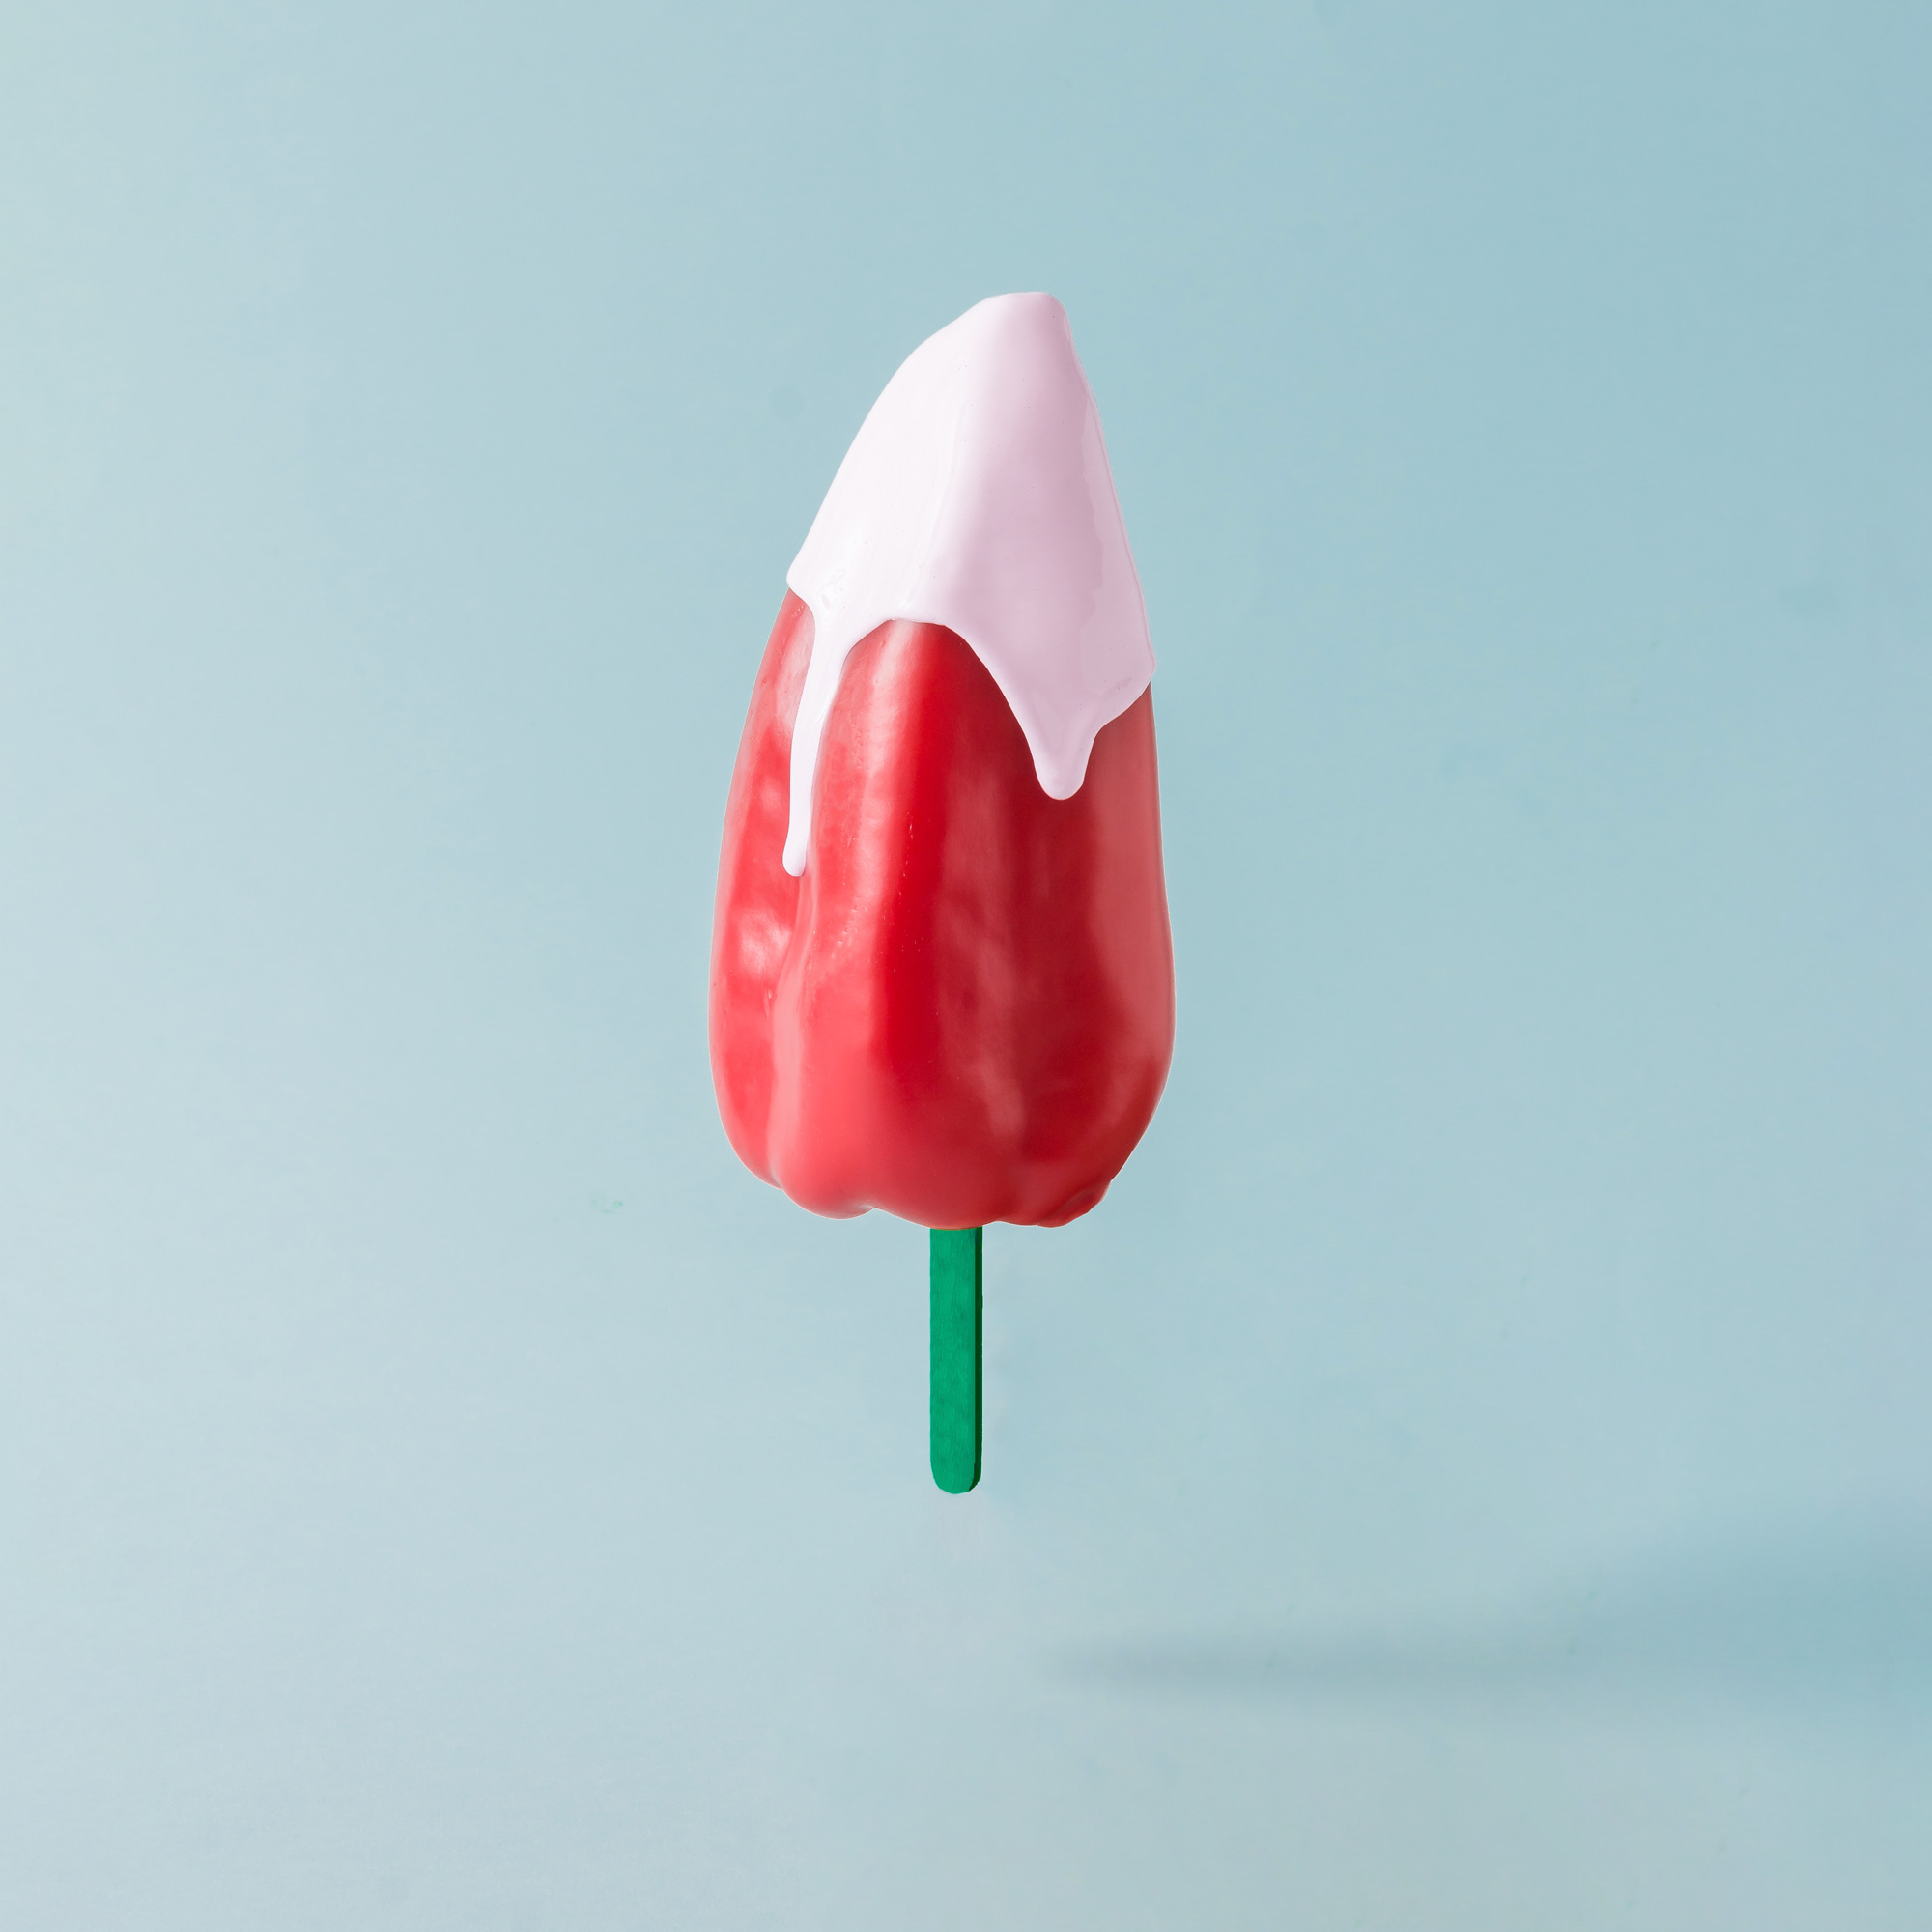 red-pepper-with-ice-cream-stick-on-pastel-blue-bac-2021-09-01-23-18-03-utc